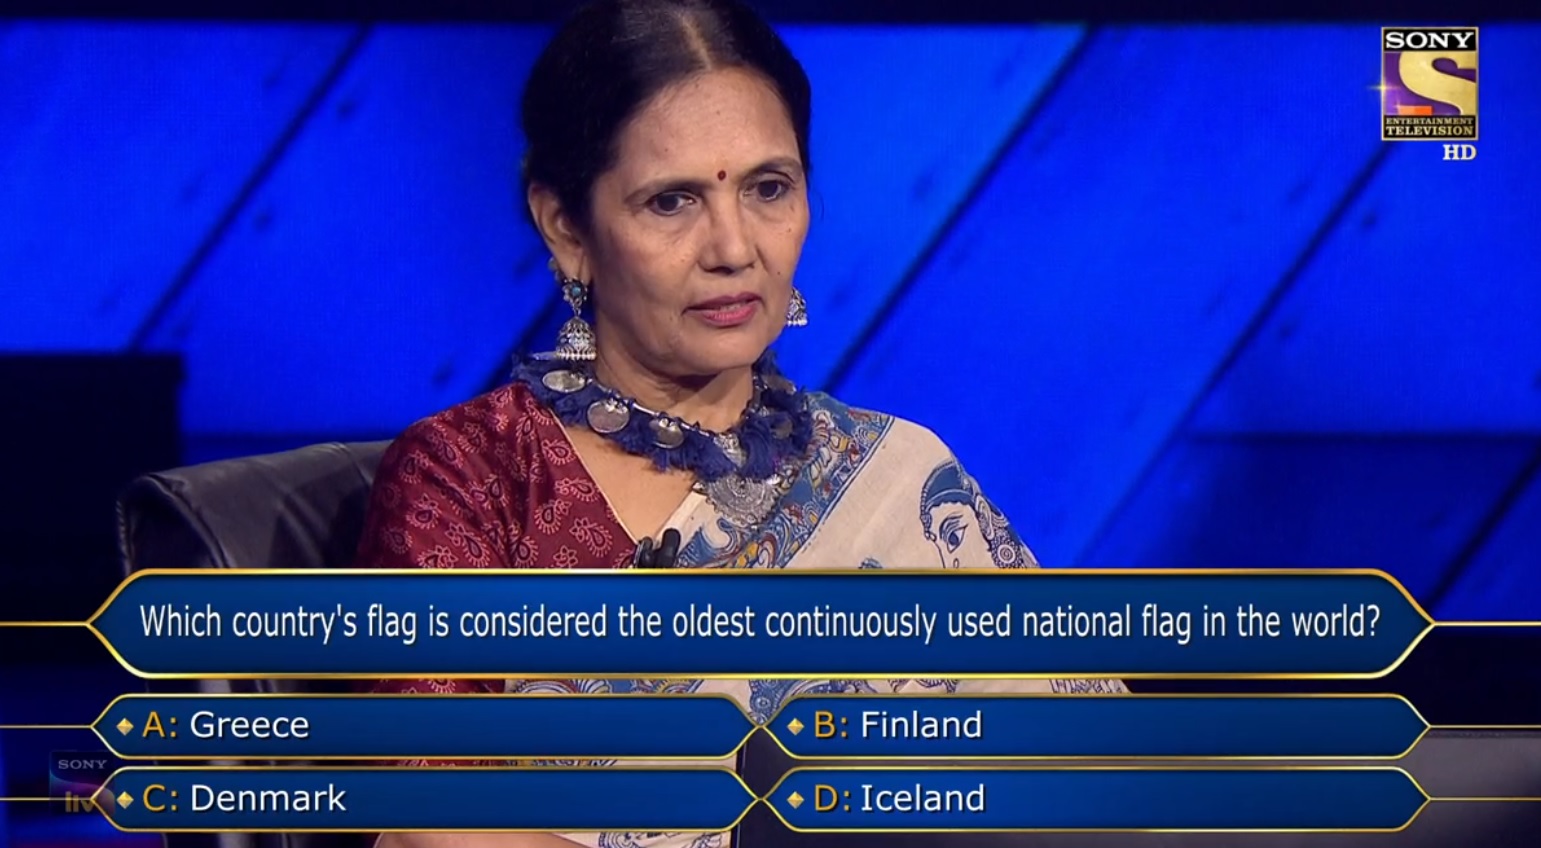 Ques : Which country’s flag is considered the oldest continuously used national flag in the world?